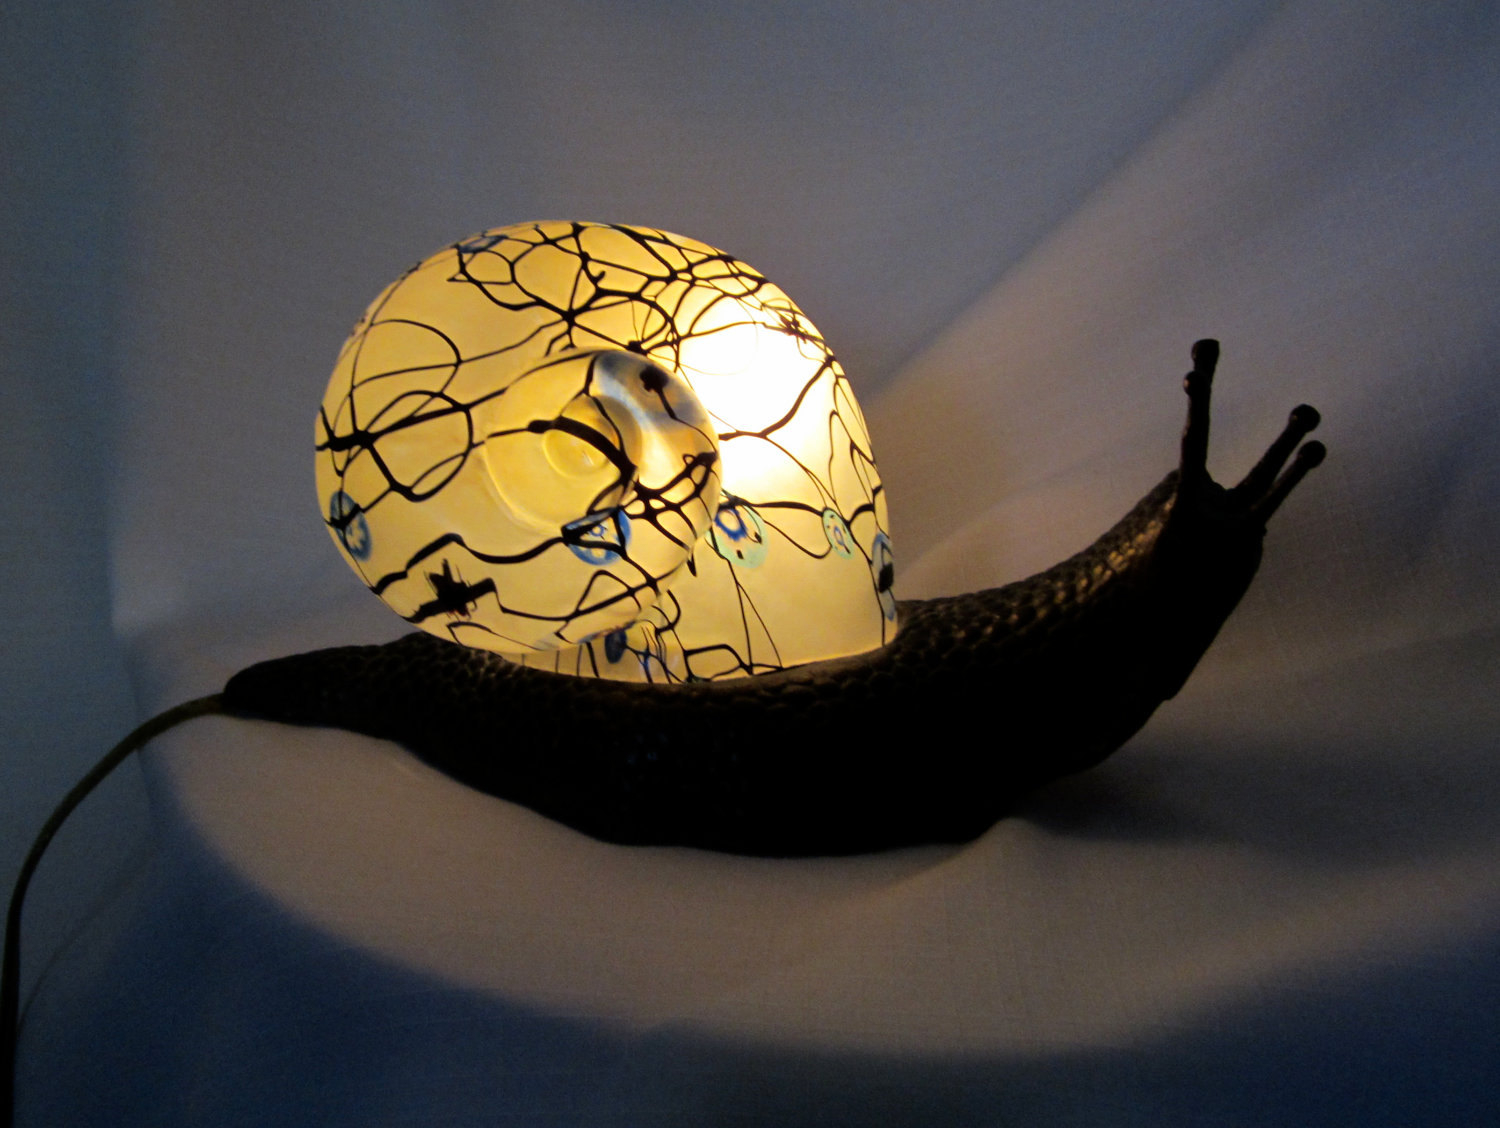 Snail lamp translucent art glass with